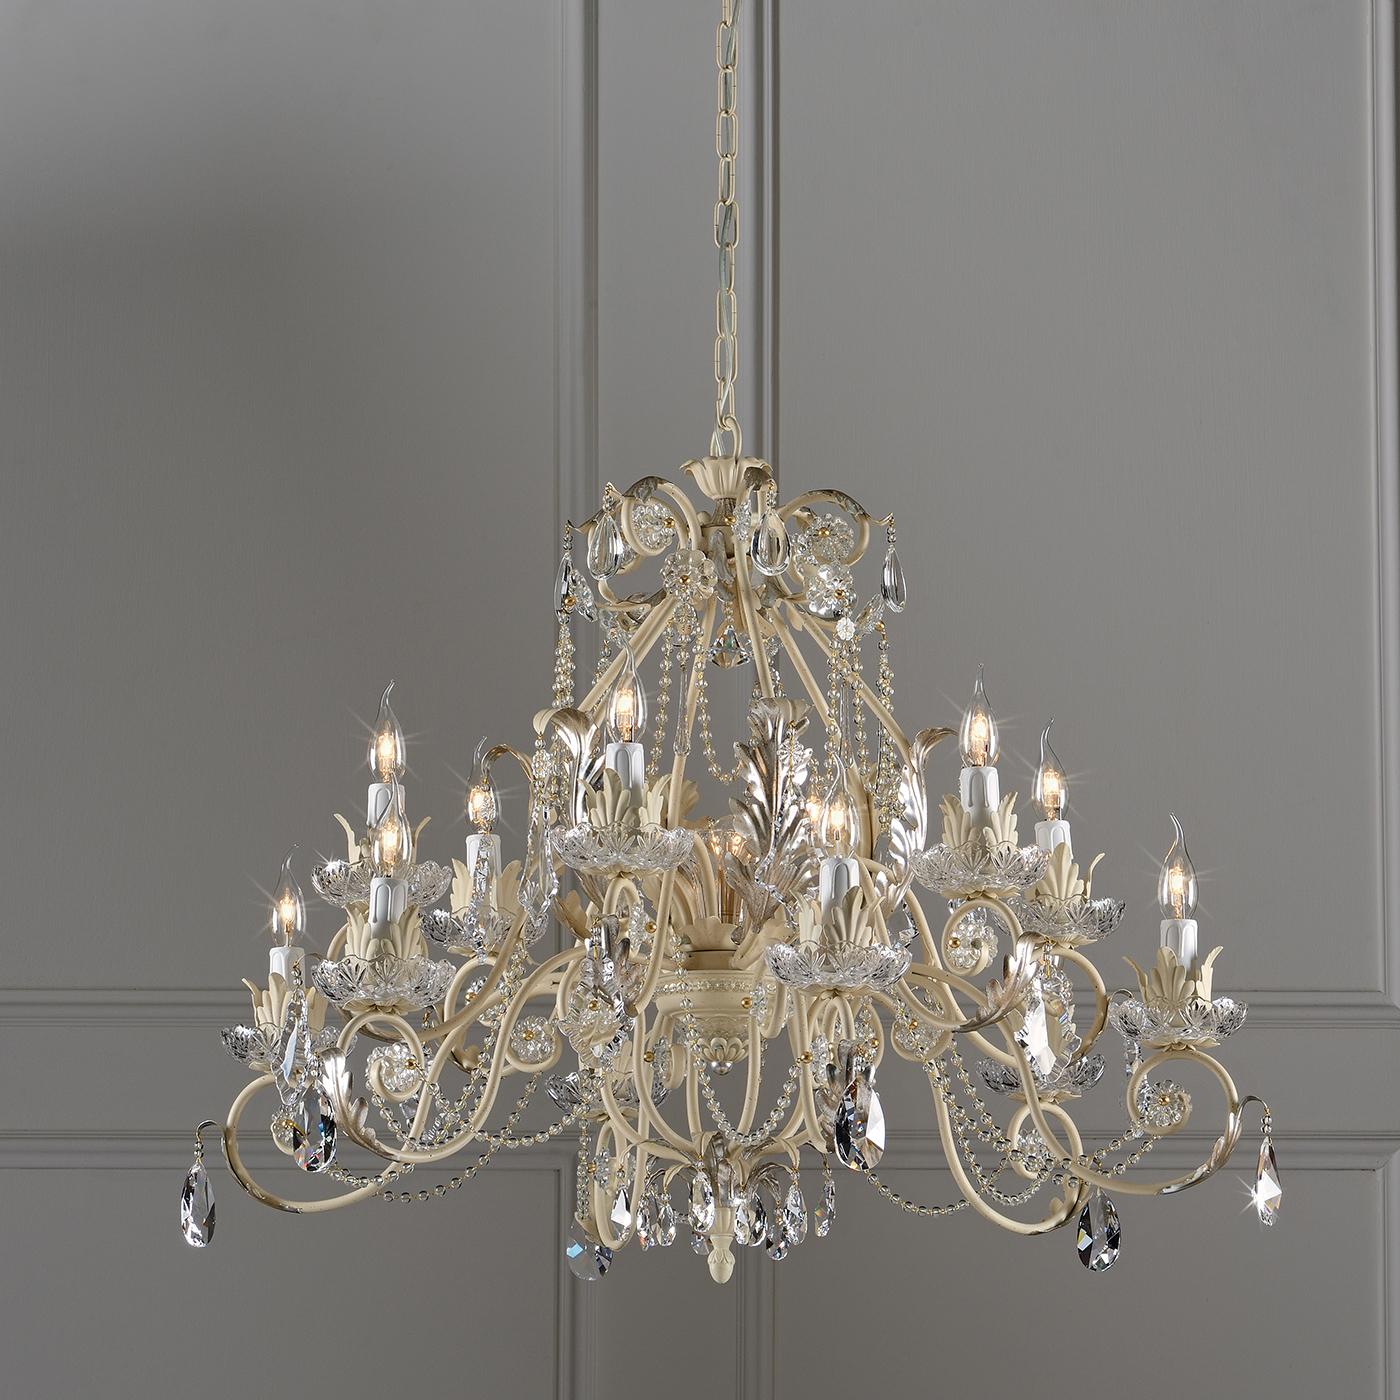 Create a lavish dining experience with this exquisitely detailed chandelier. Made entirely by hand, the chandelier boasts an ivory finish with silver leaf detailing. With twelve arms, the chandelier drips with crystal pendants and glass pearls, for